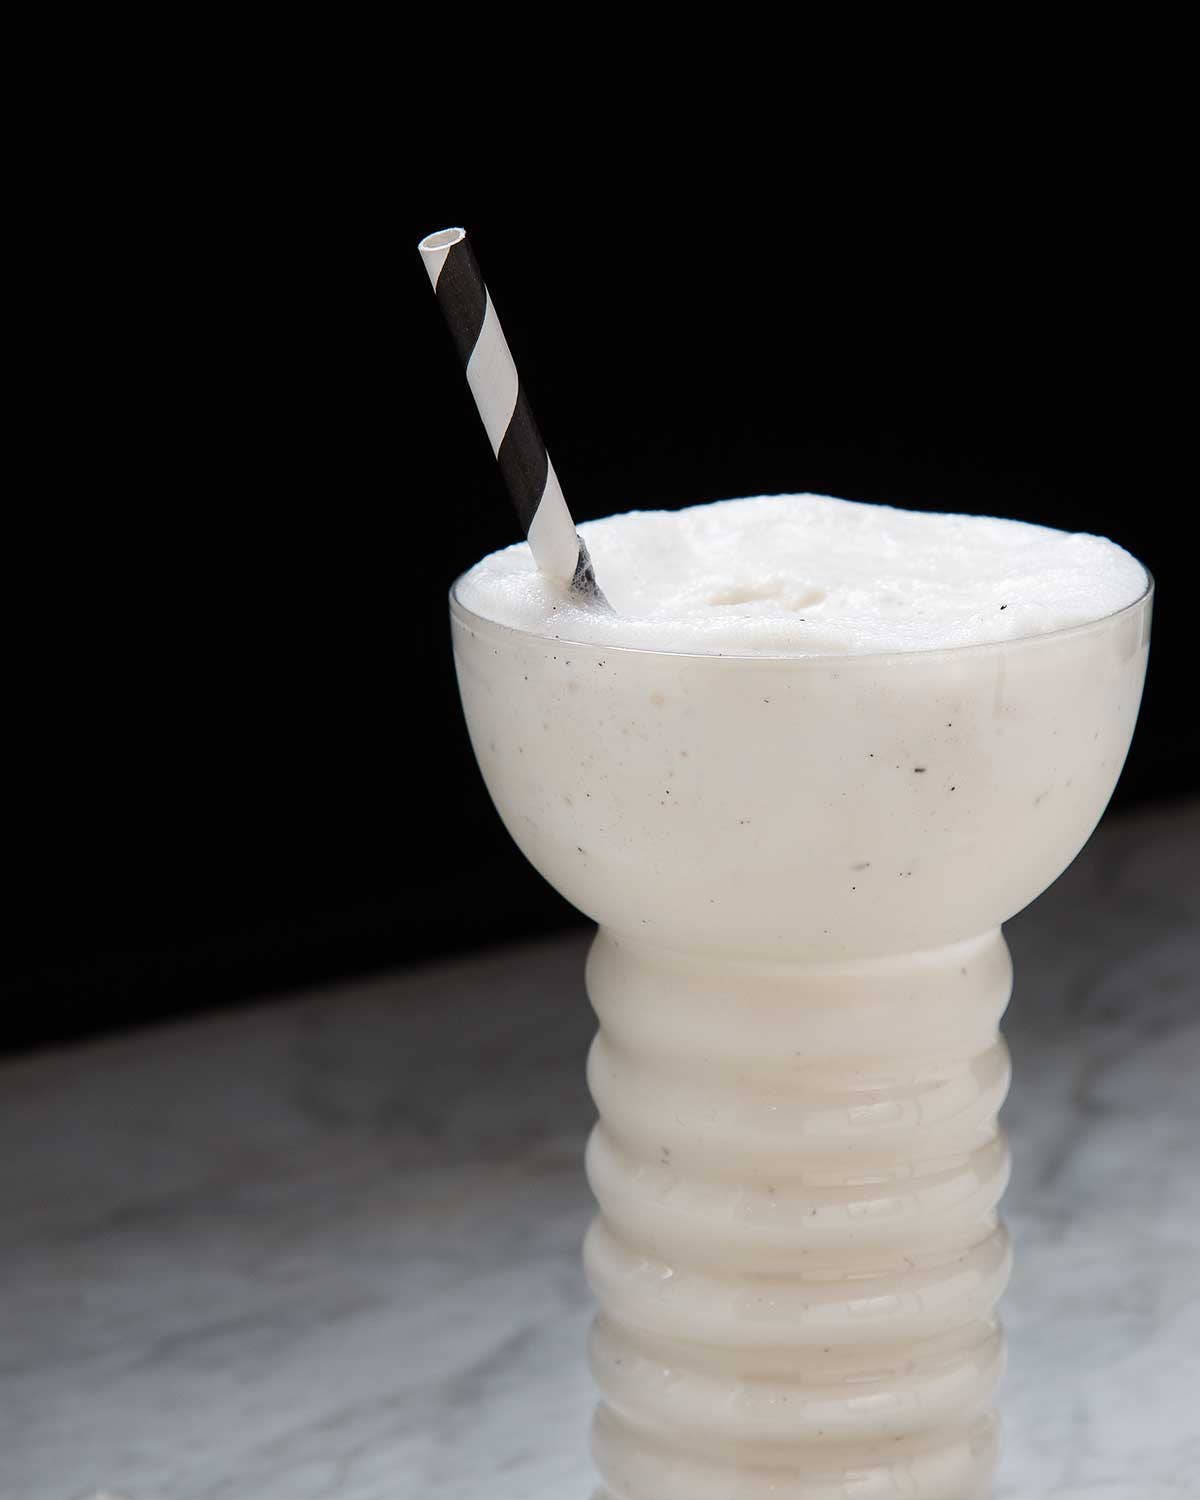 Have You Had a Boston Cooler, the Midwest’s Beloved Soda Shake?